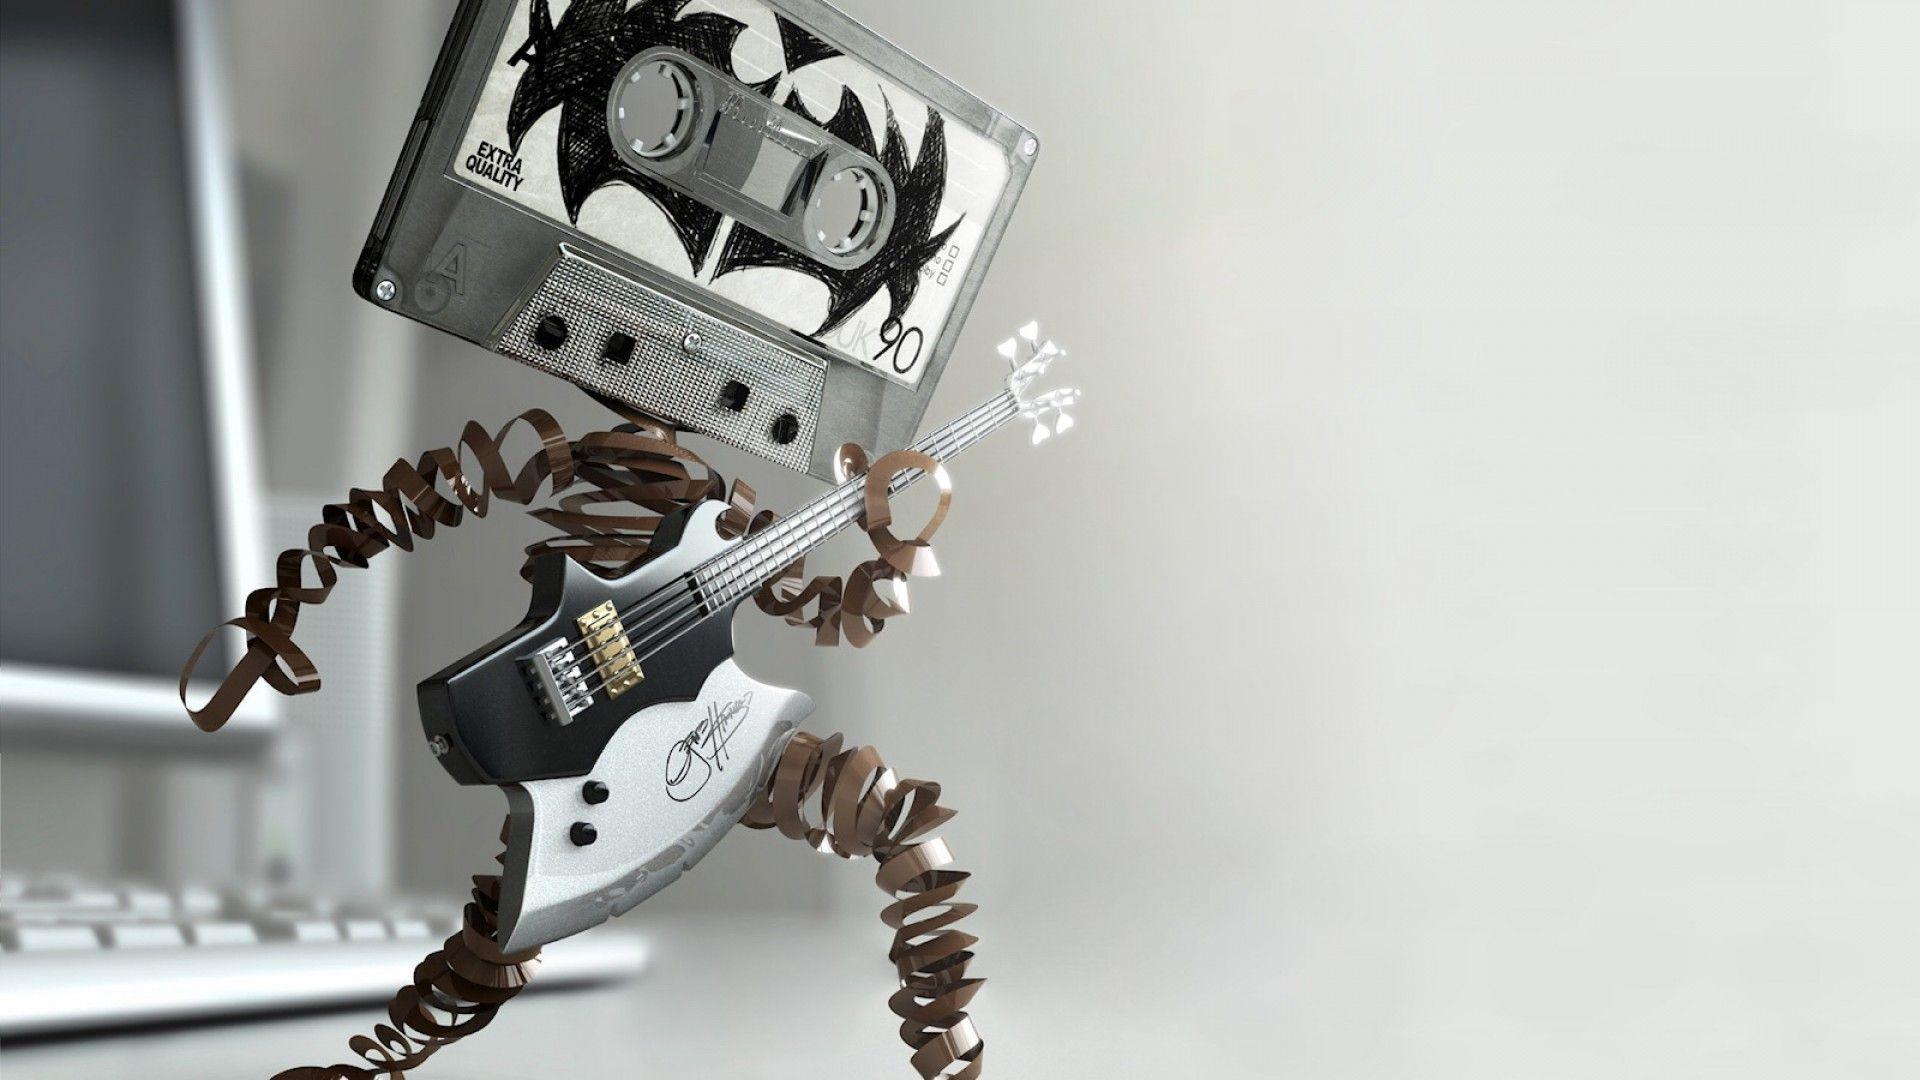 Download Funny Cassette Tape Playing Bass Guitar Wallpaper Free